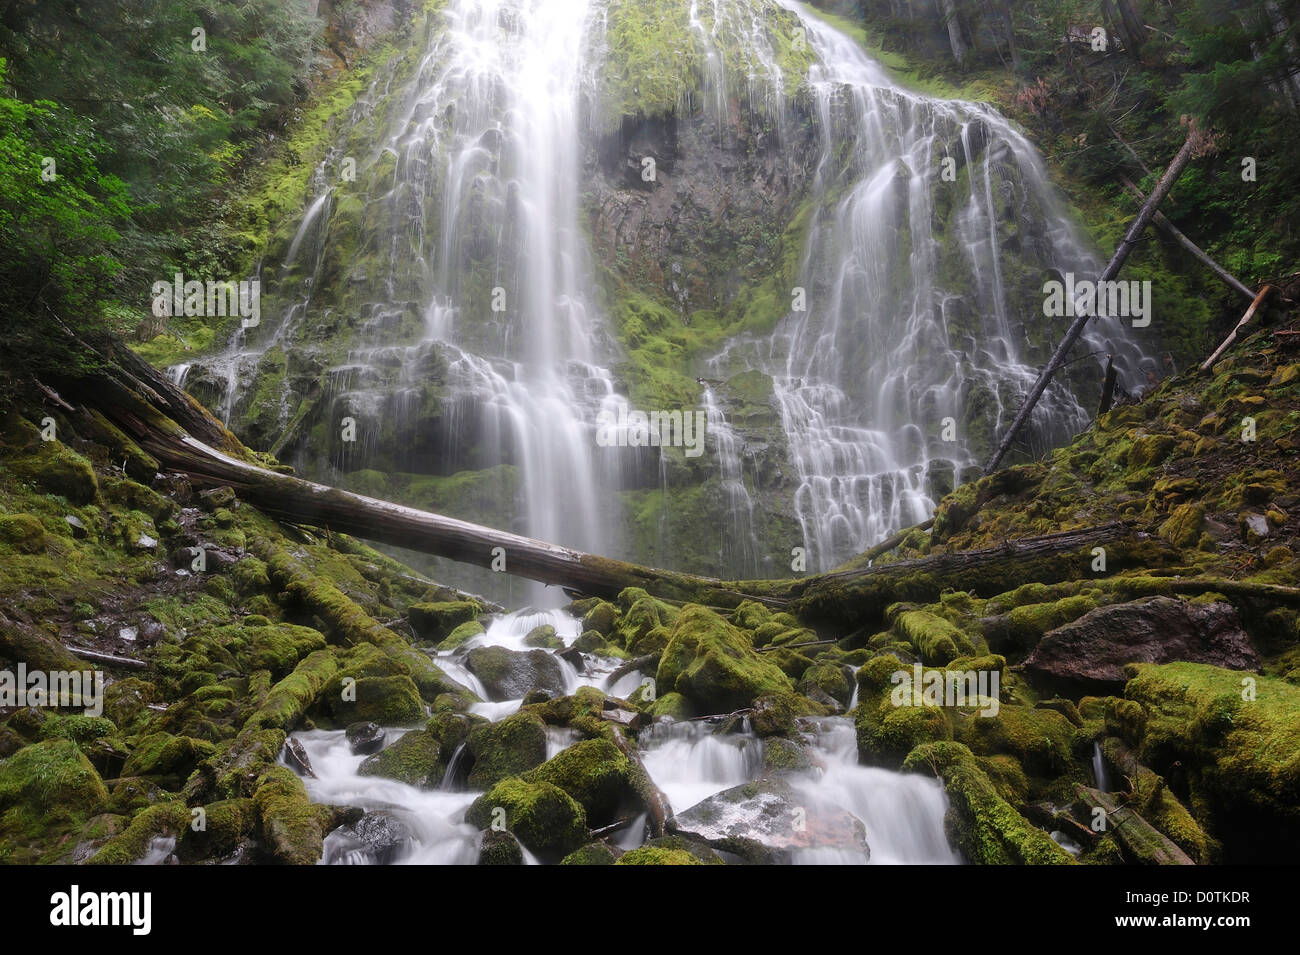 Cascading, flow, Waterfall, Proxy Falls, Cascade Mountains, Willamette, National Forest, cascade, Oregon, USA, United States, Am Stock Photo